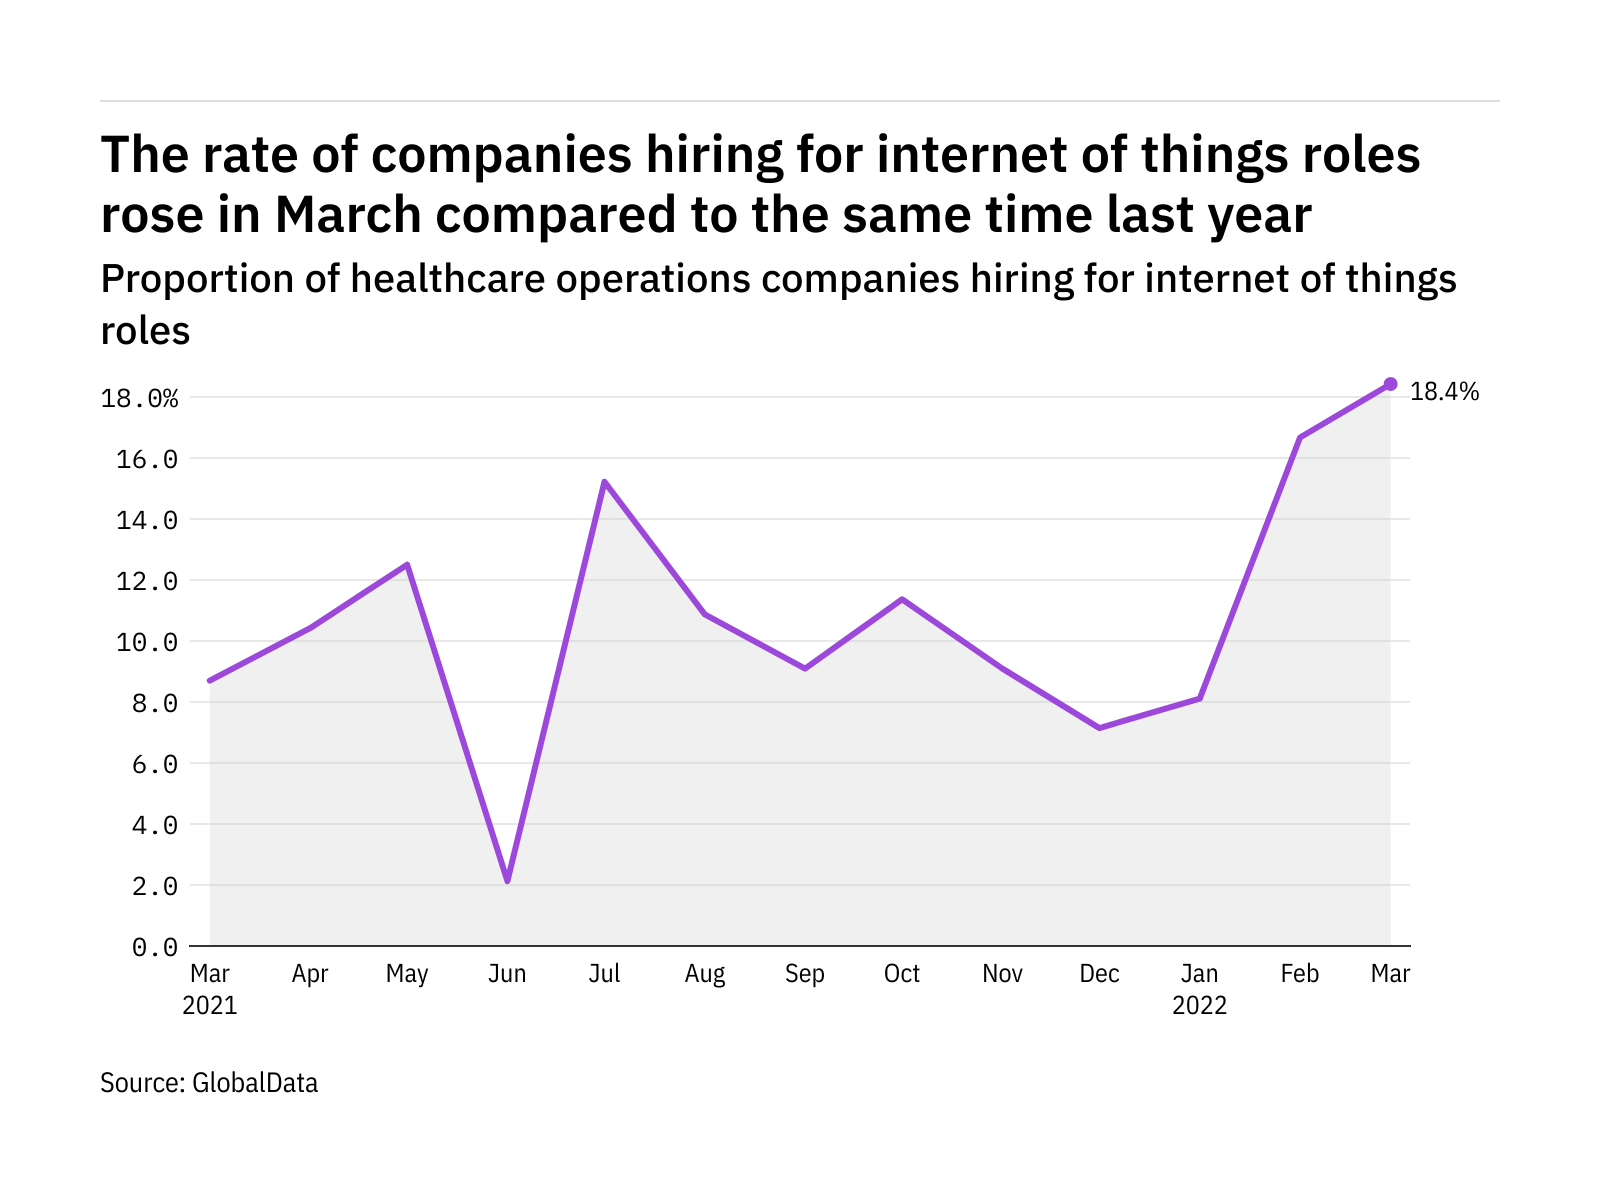 Internet of things hiring levels in the healthcare industry rose to a year-high in March 2022